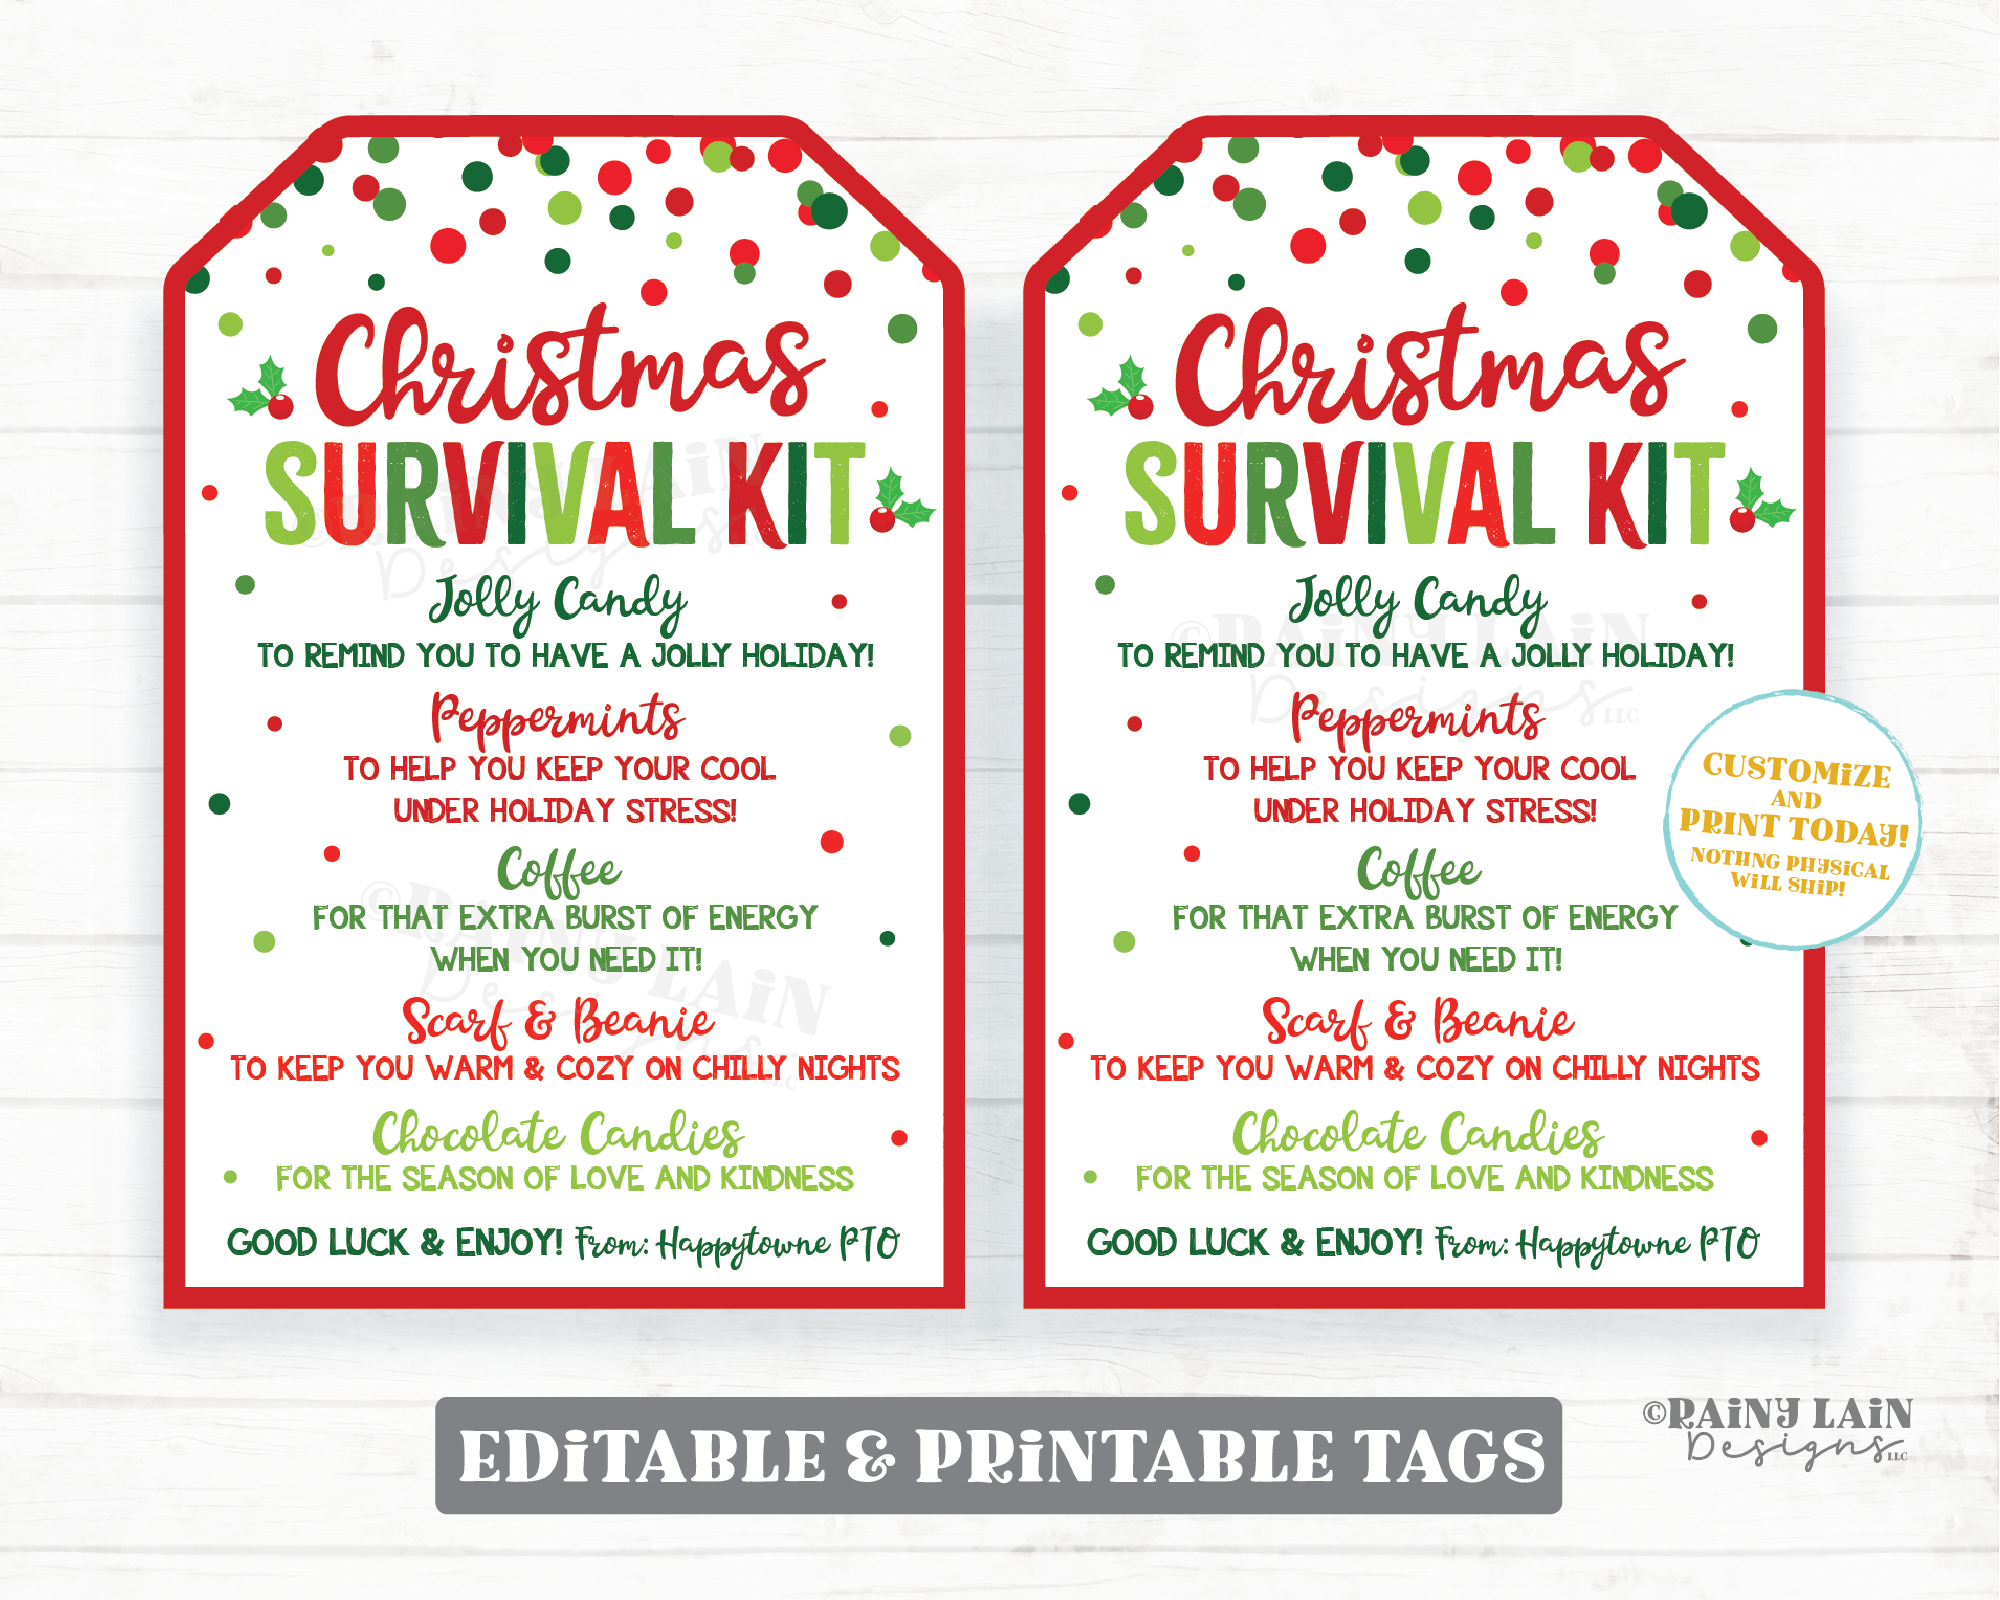 Christmas Survival Kit Tag Treat Thank you Holiday Appreciation Gift Favor Employee Company Staff Teacher Sweets PTO